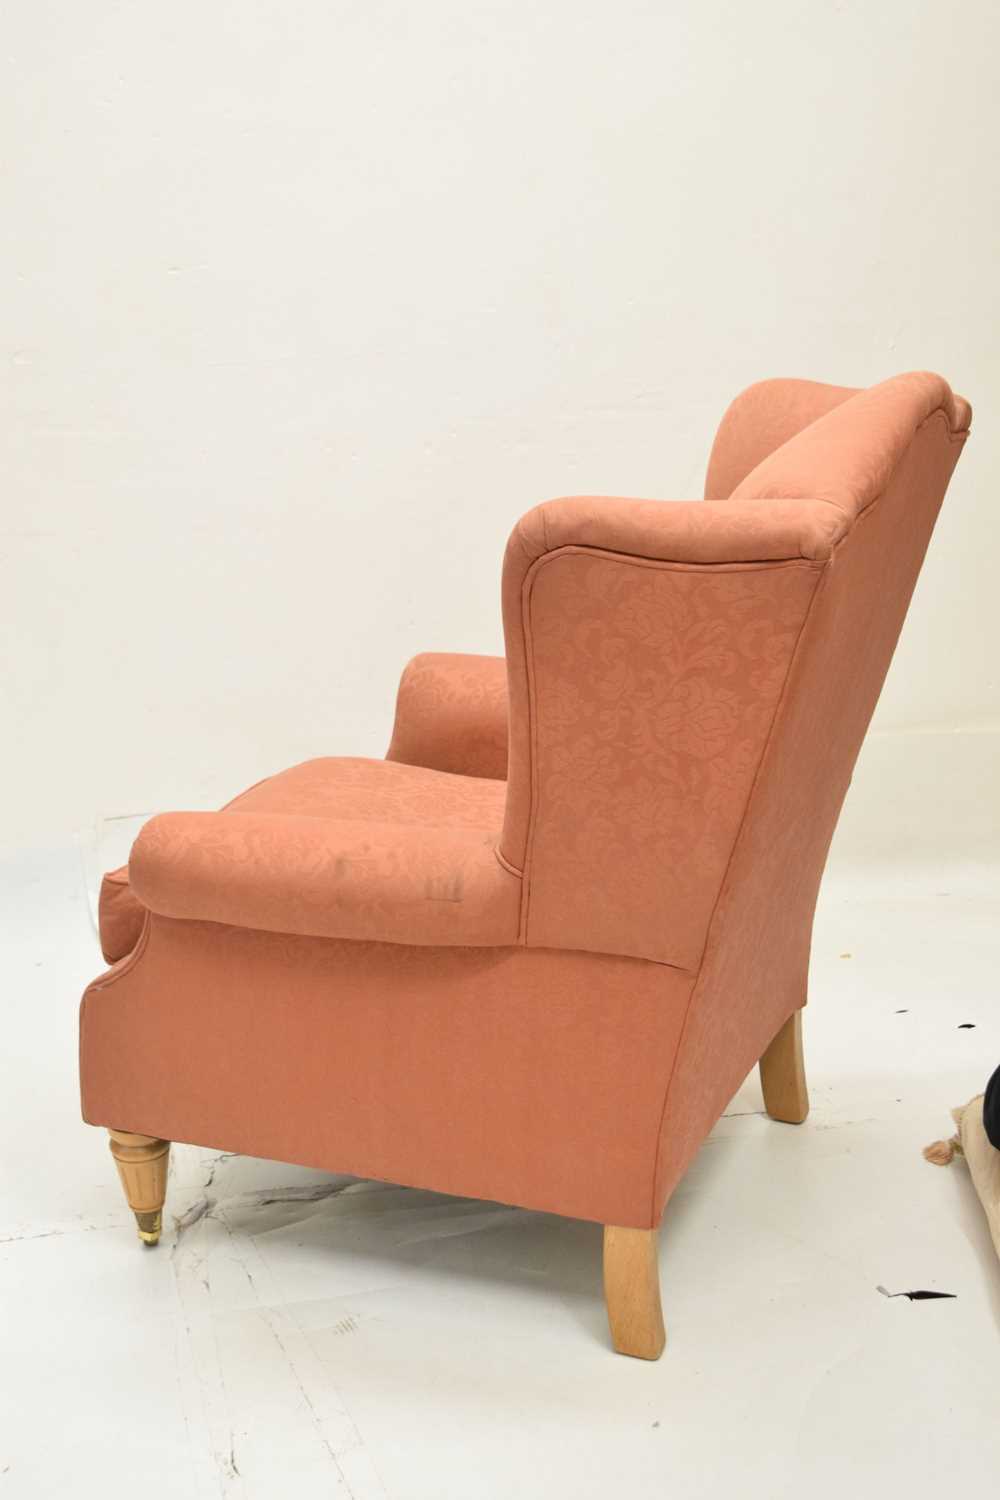 Laura Ashley wing armchair - Image 6 of 6